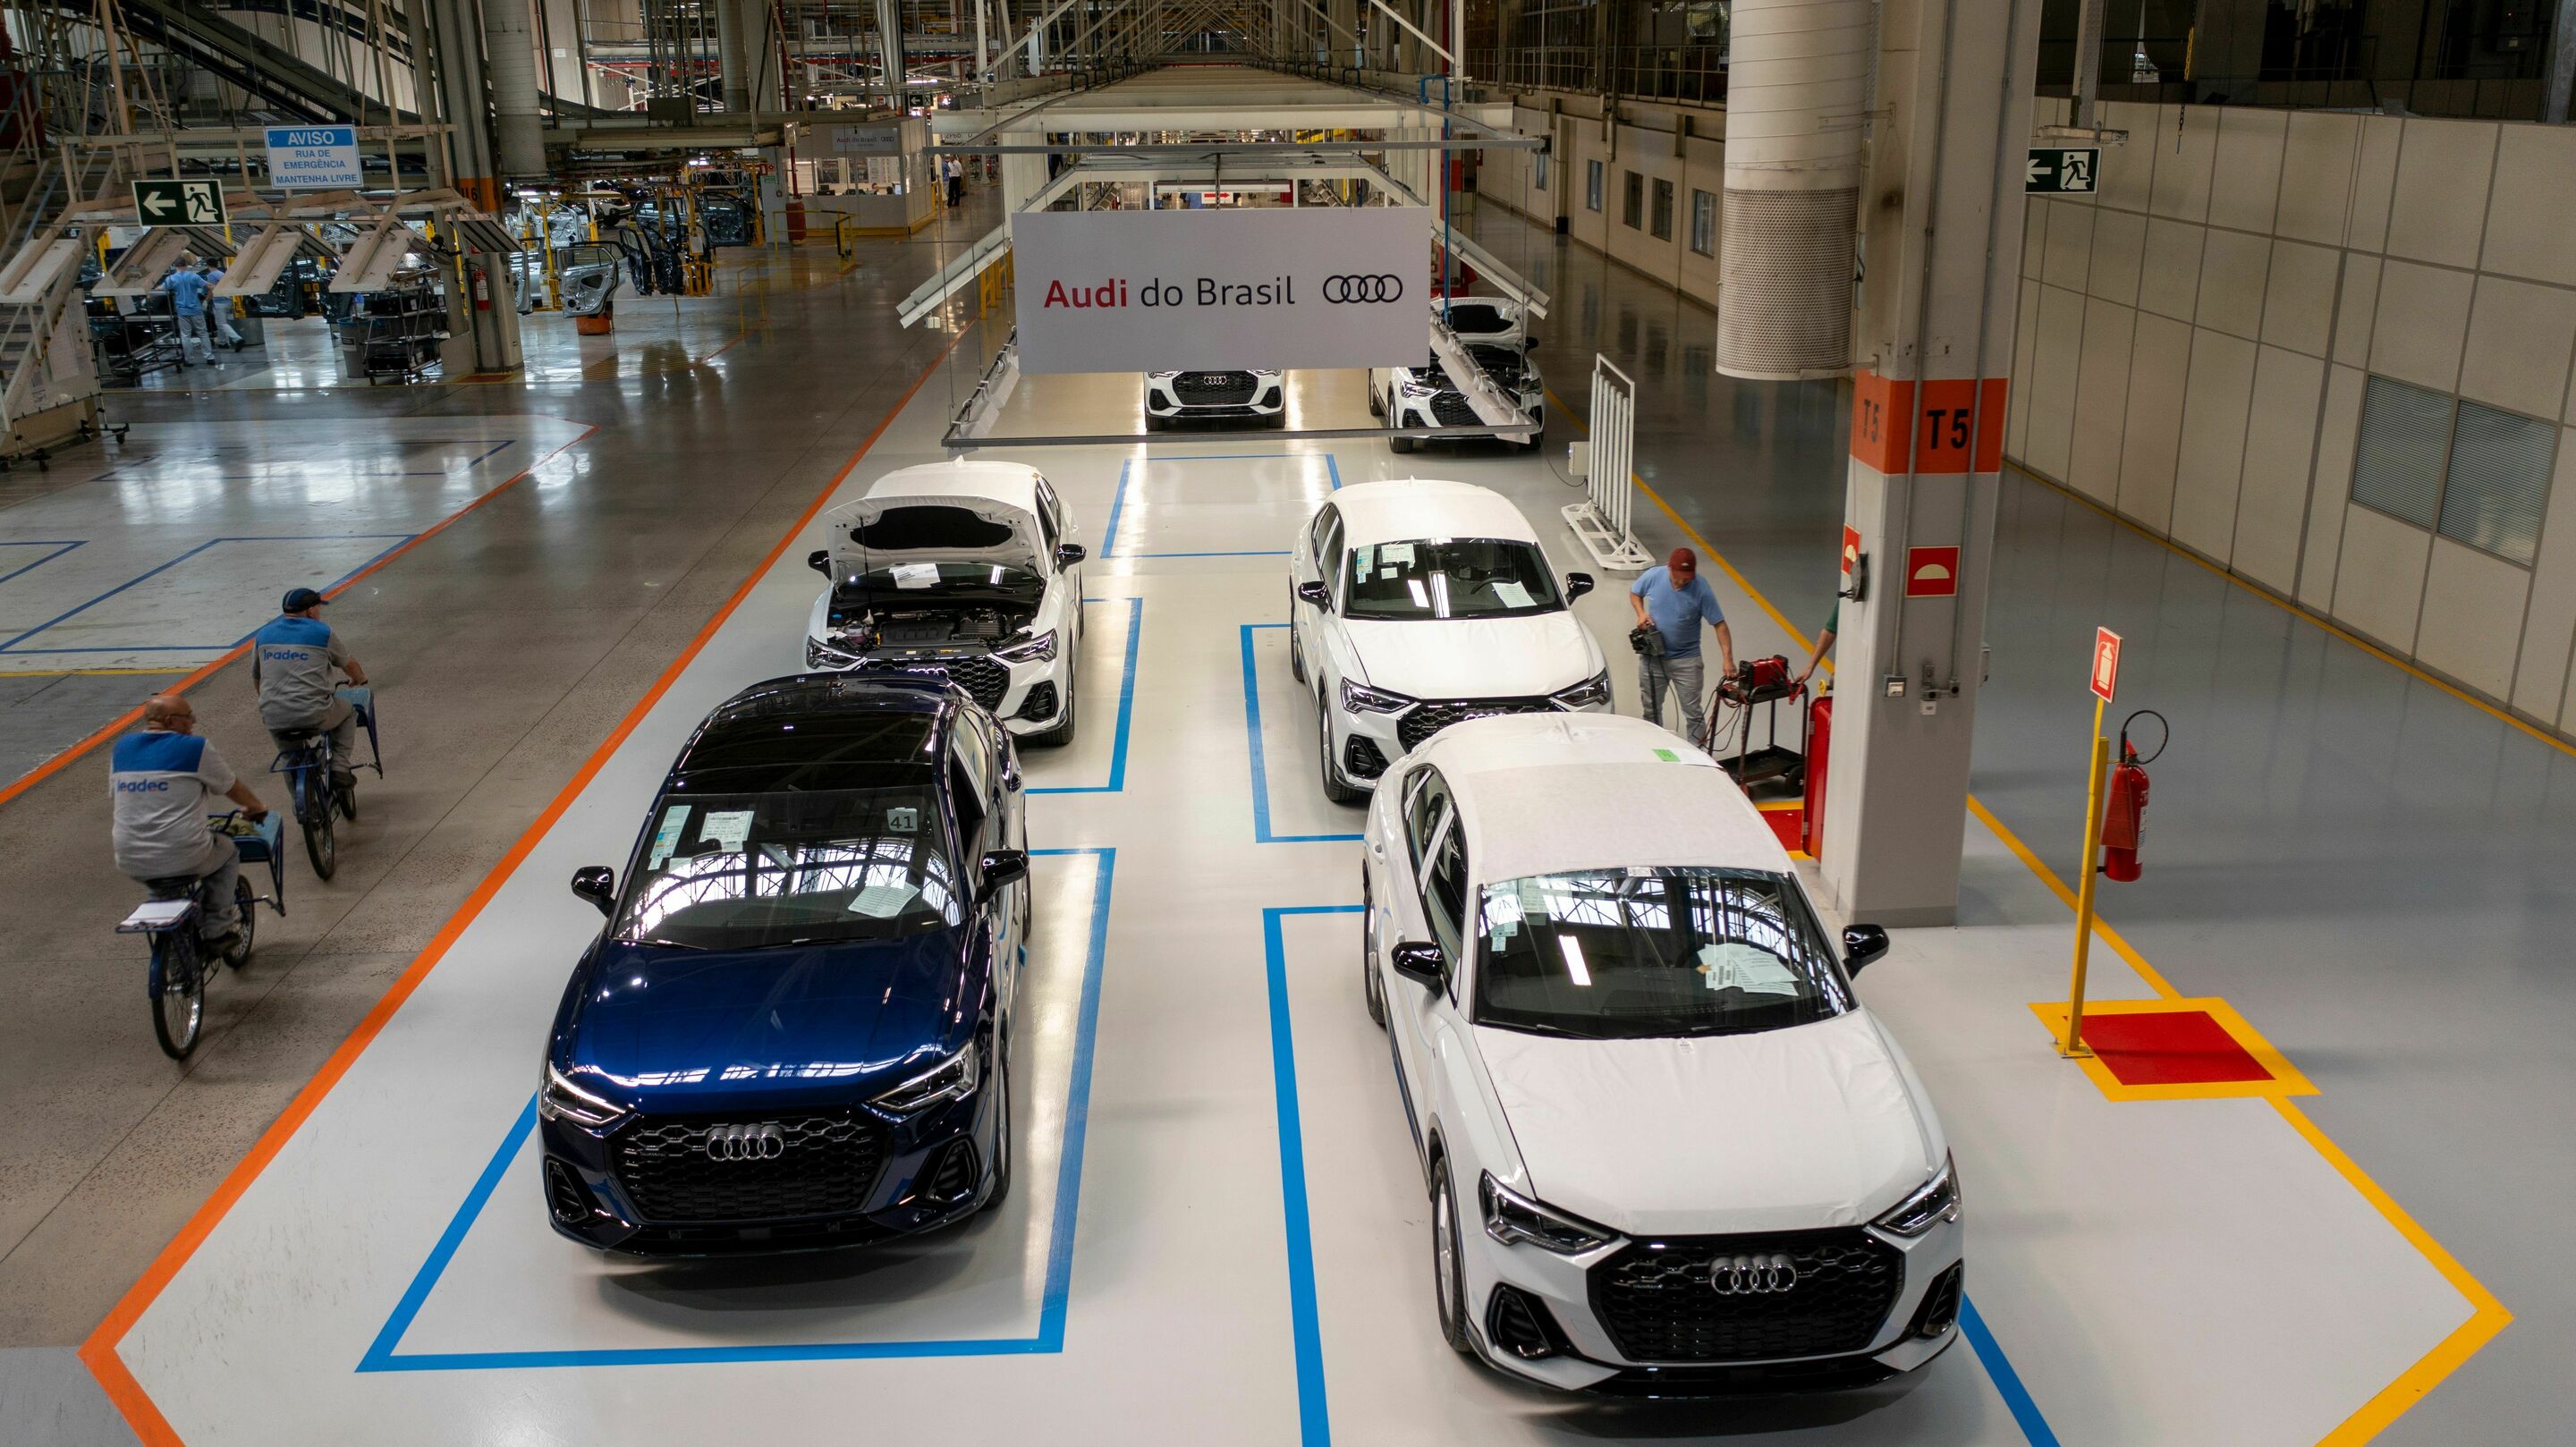 Audi do Brasil relaunches its national production line in Paraná with the new Audi Q3 and Q3 Sportback